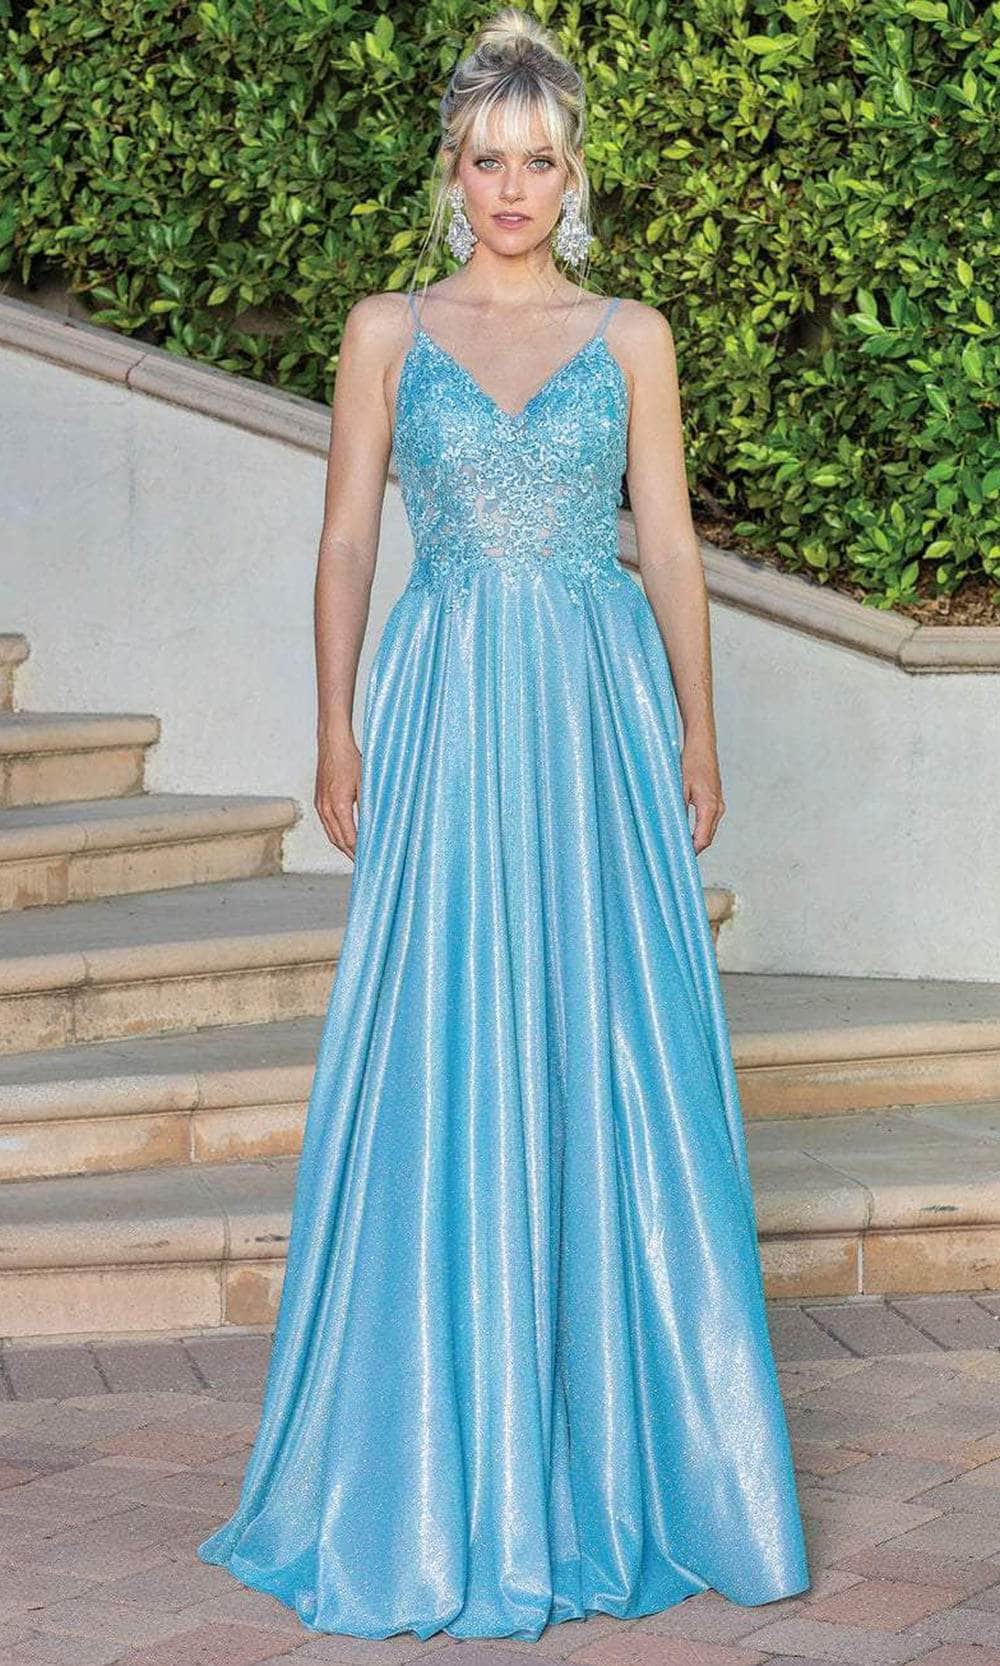 Dancing Queen 4261 - Embroidered V-neck Prom Dress